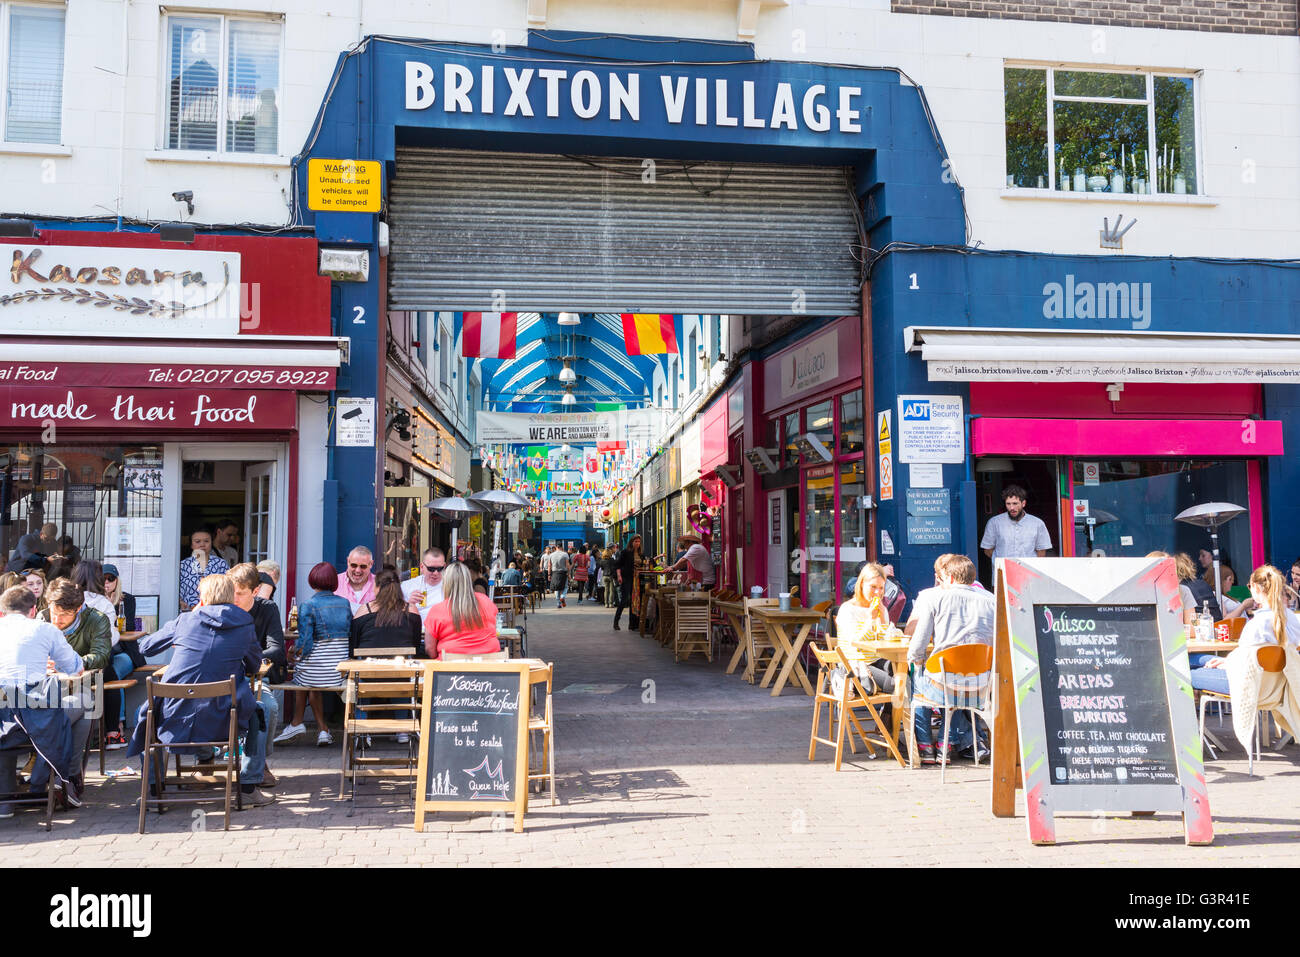 People eating outside the main entrance of Brixton Village Market, a multicultural community market with independent shops Stock Photo